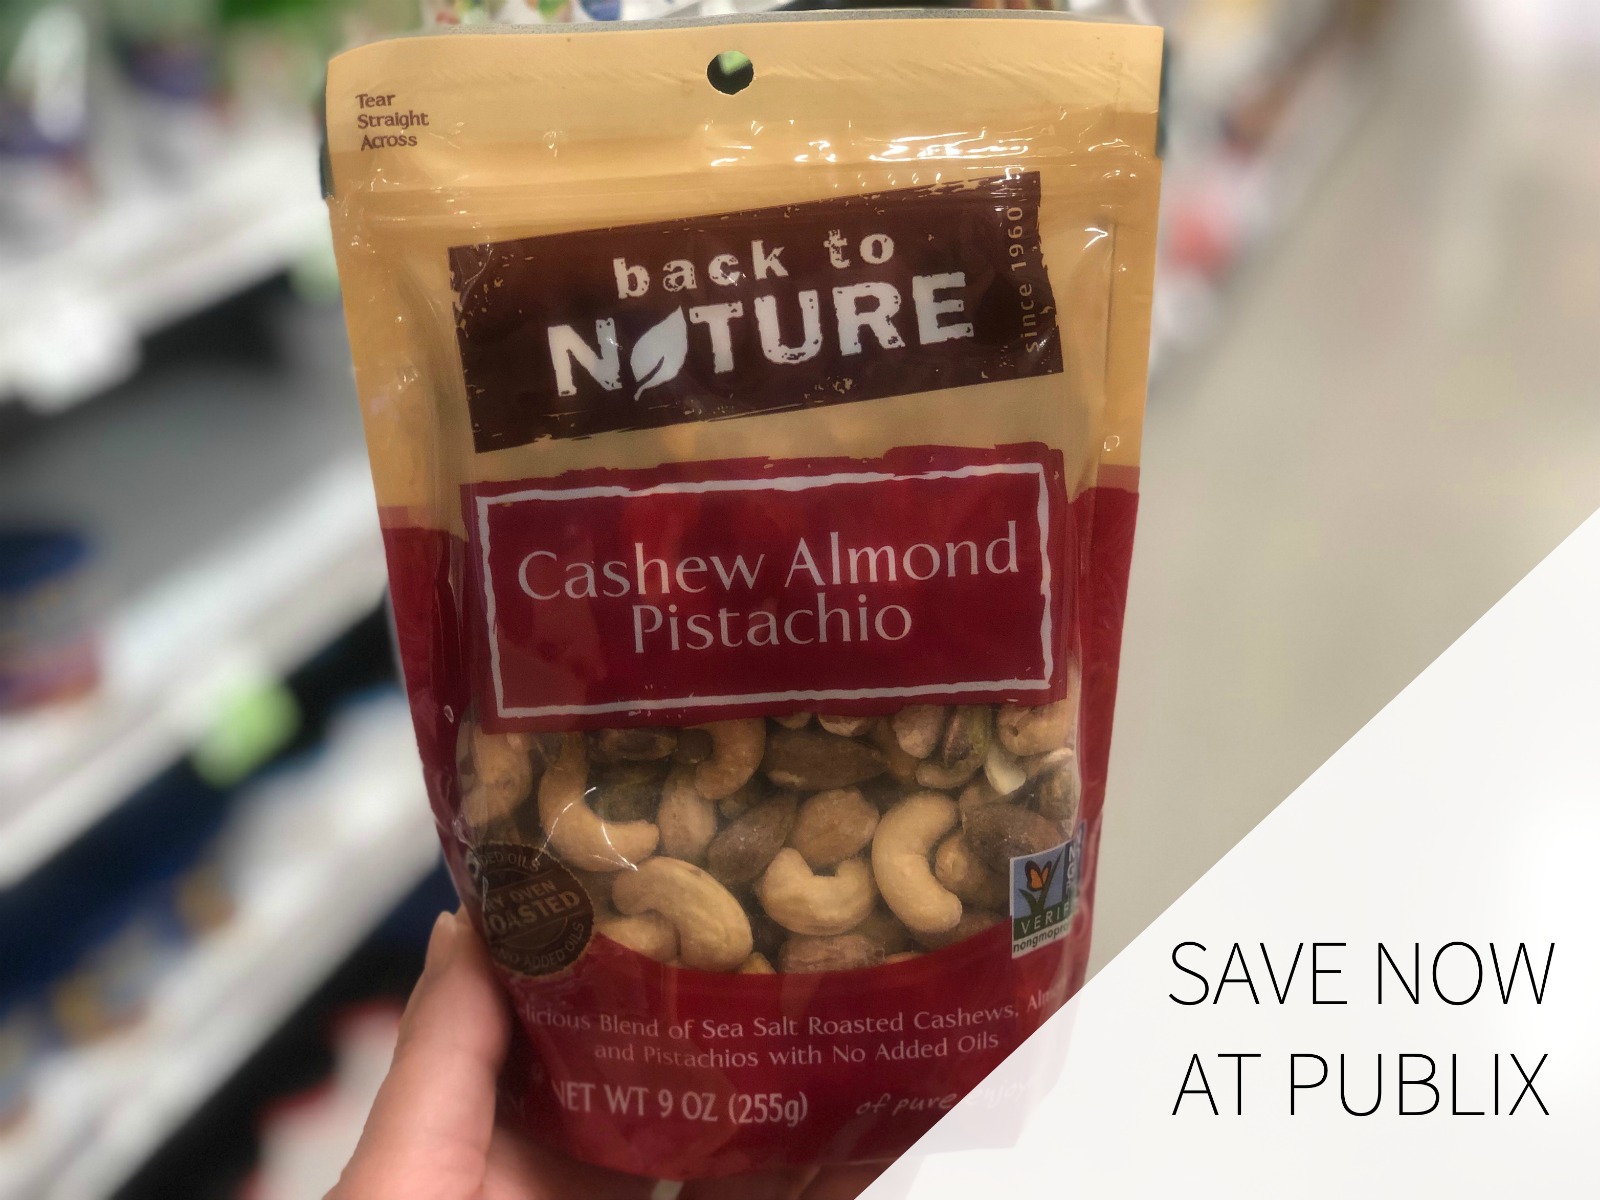 Stock Up On Back To Nature Nuts & Save Now At Publix on I Heart Publix